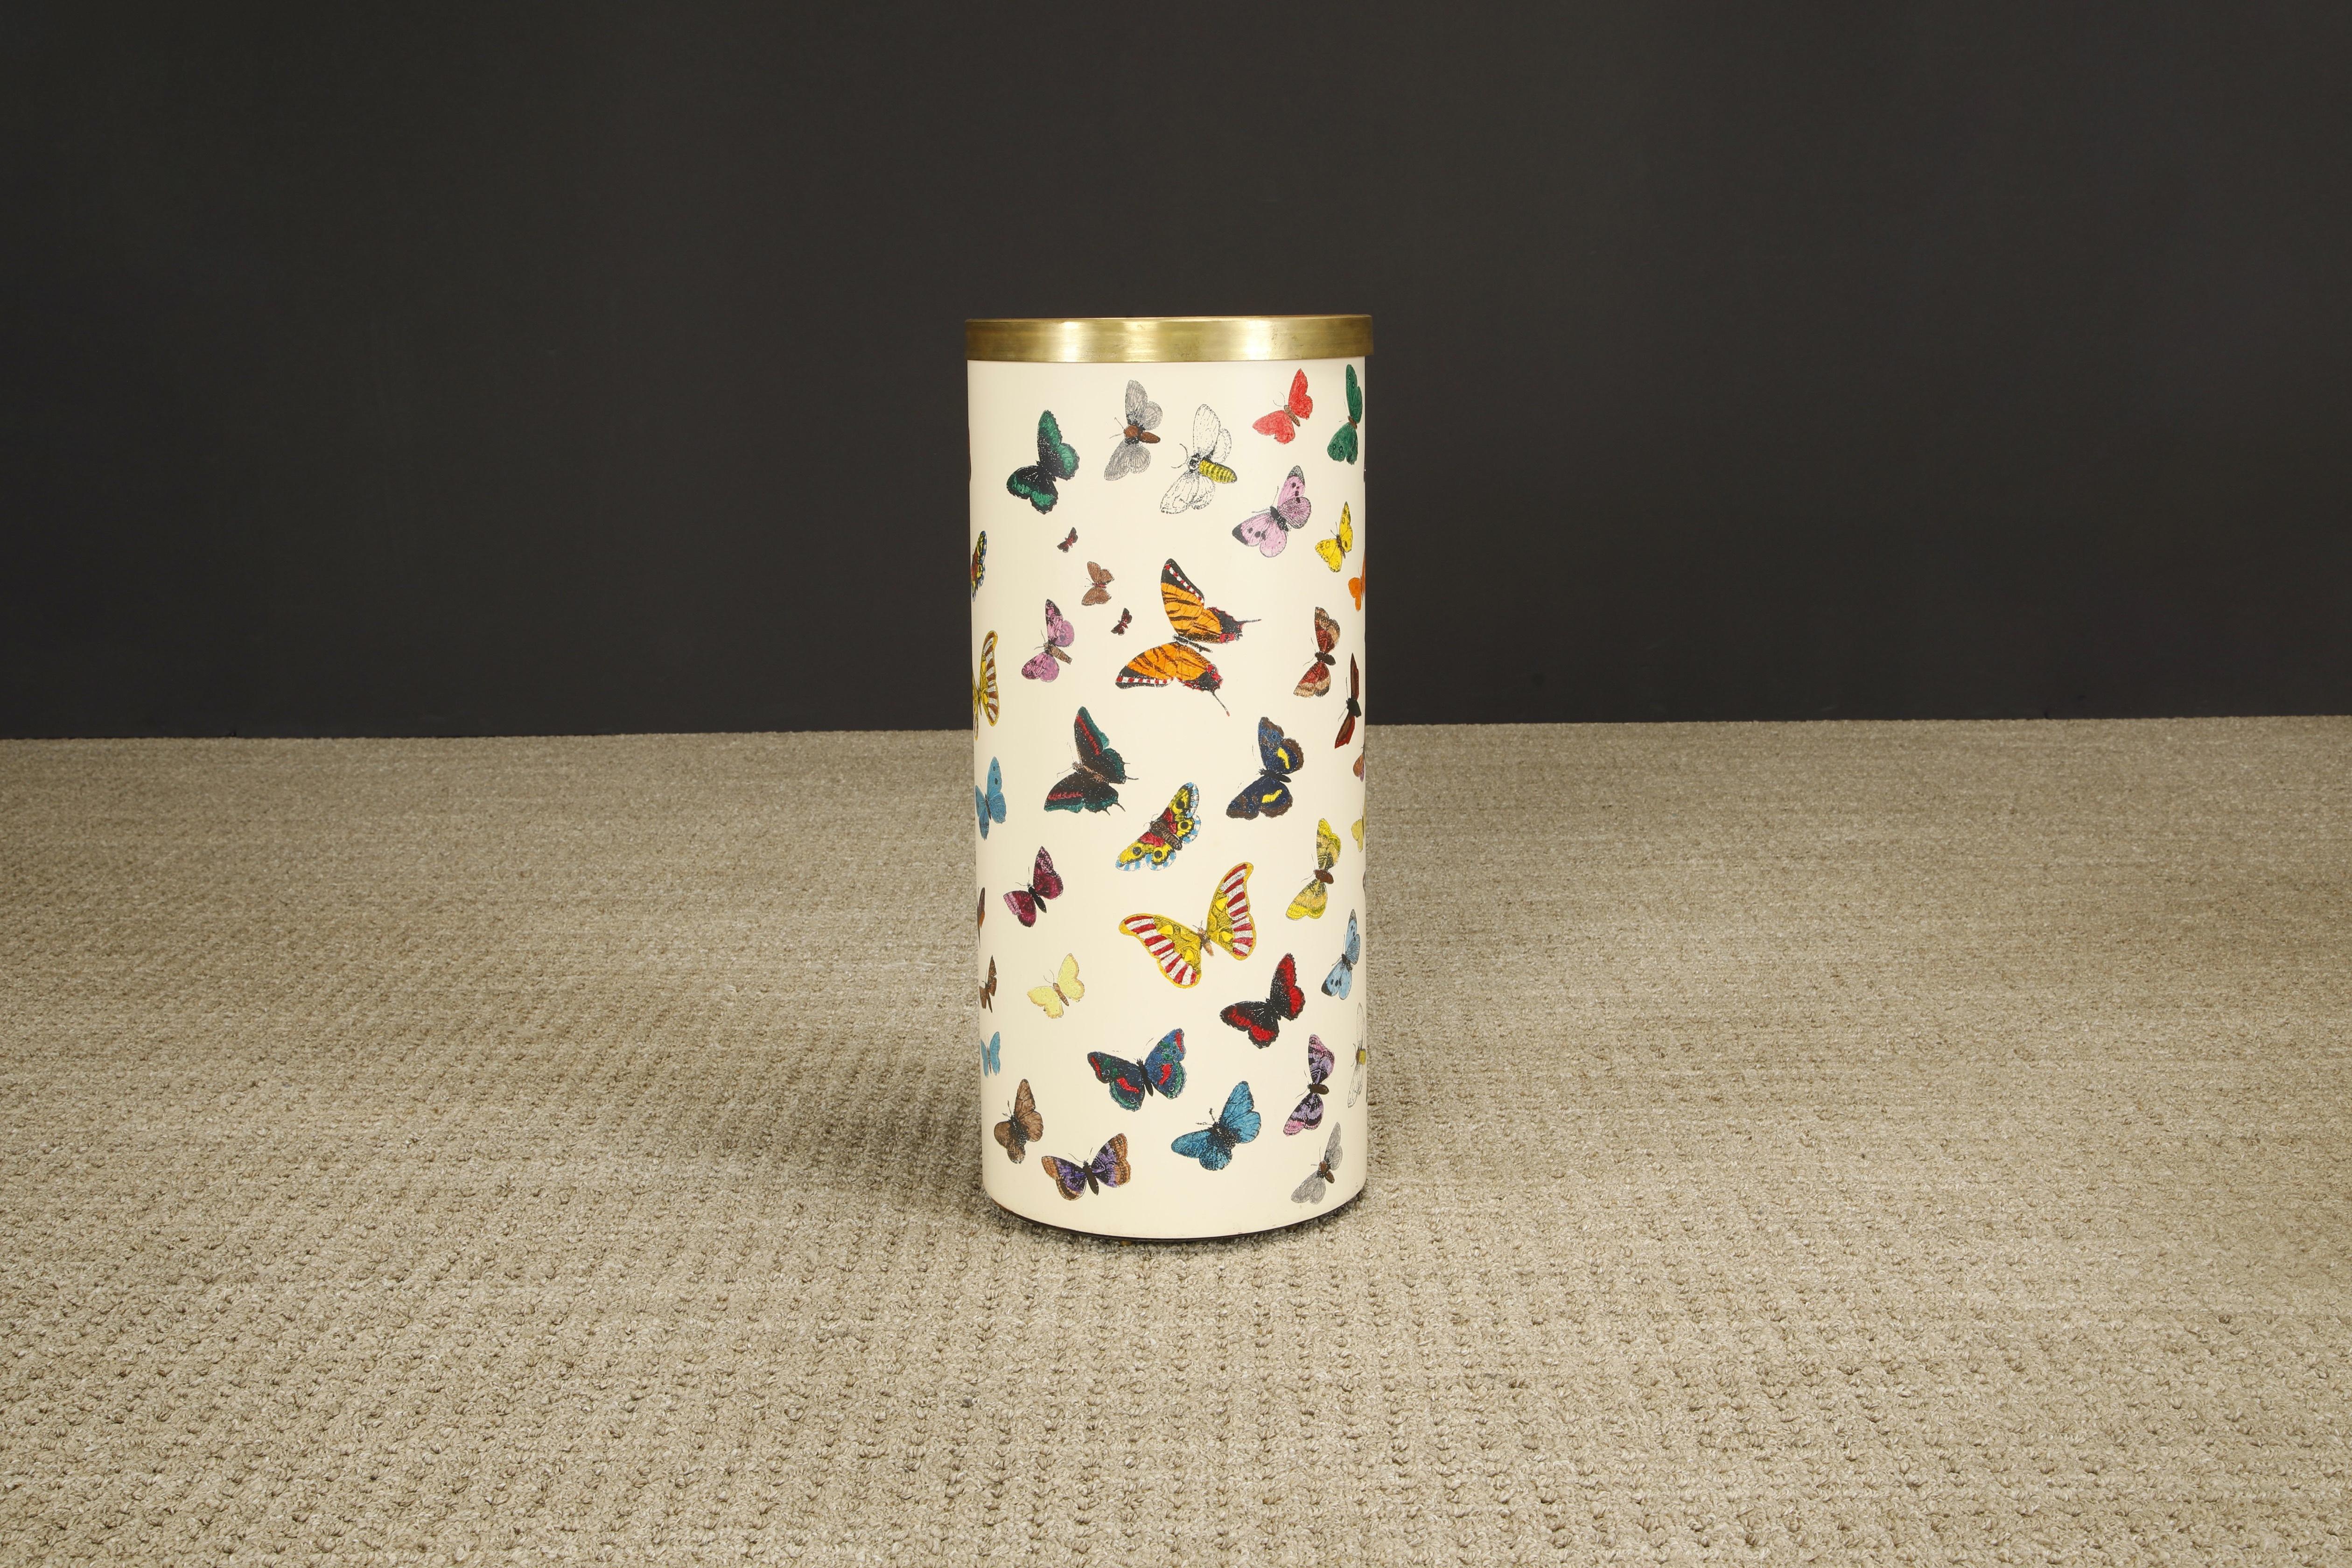 This rare and coveted collectors item is the 'Farfalle' (translated to 'Butterflies') umbrella stand by Piero Fornasetti, circa 1960s, signed underneath. 

This hefty round umbrella bin is made with lithographic transfer and lacquered metal that